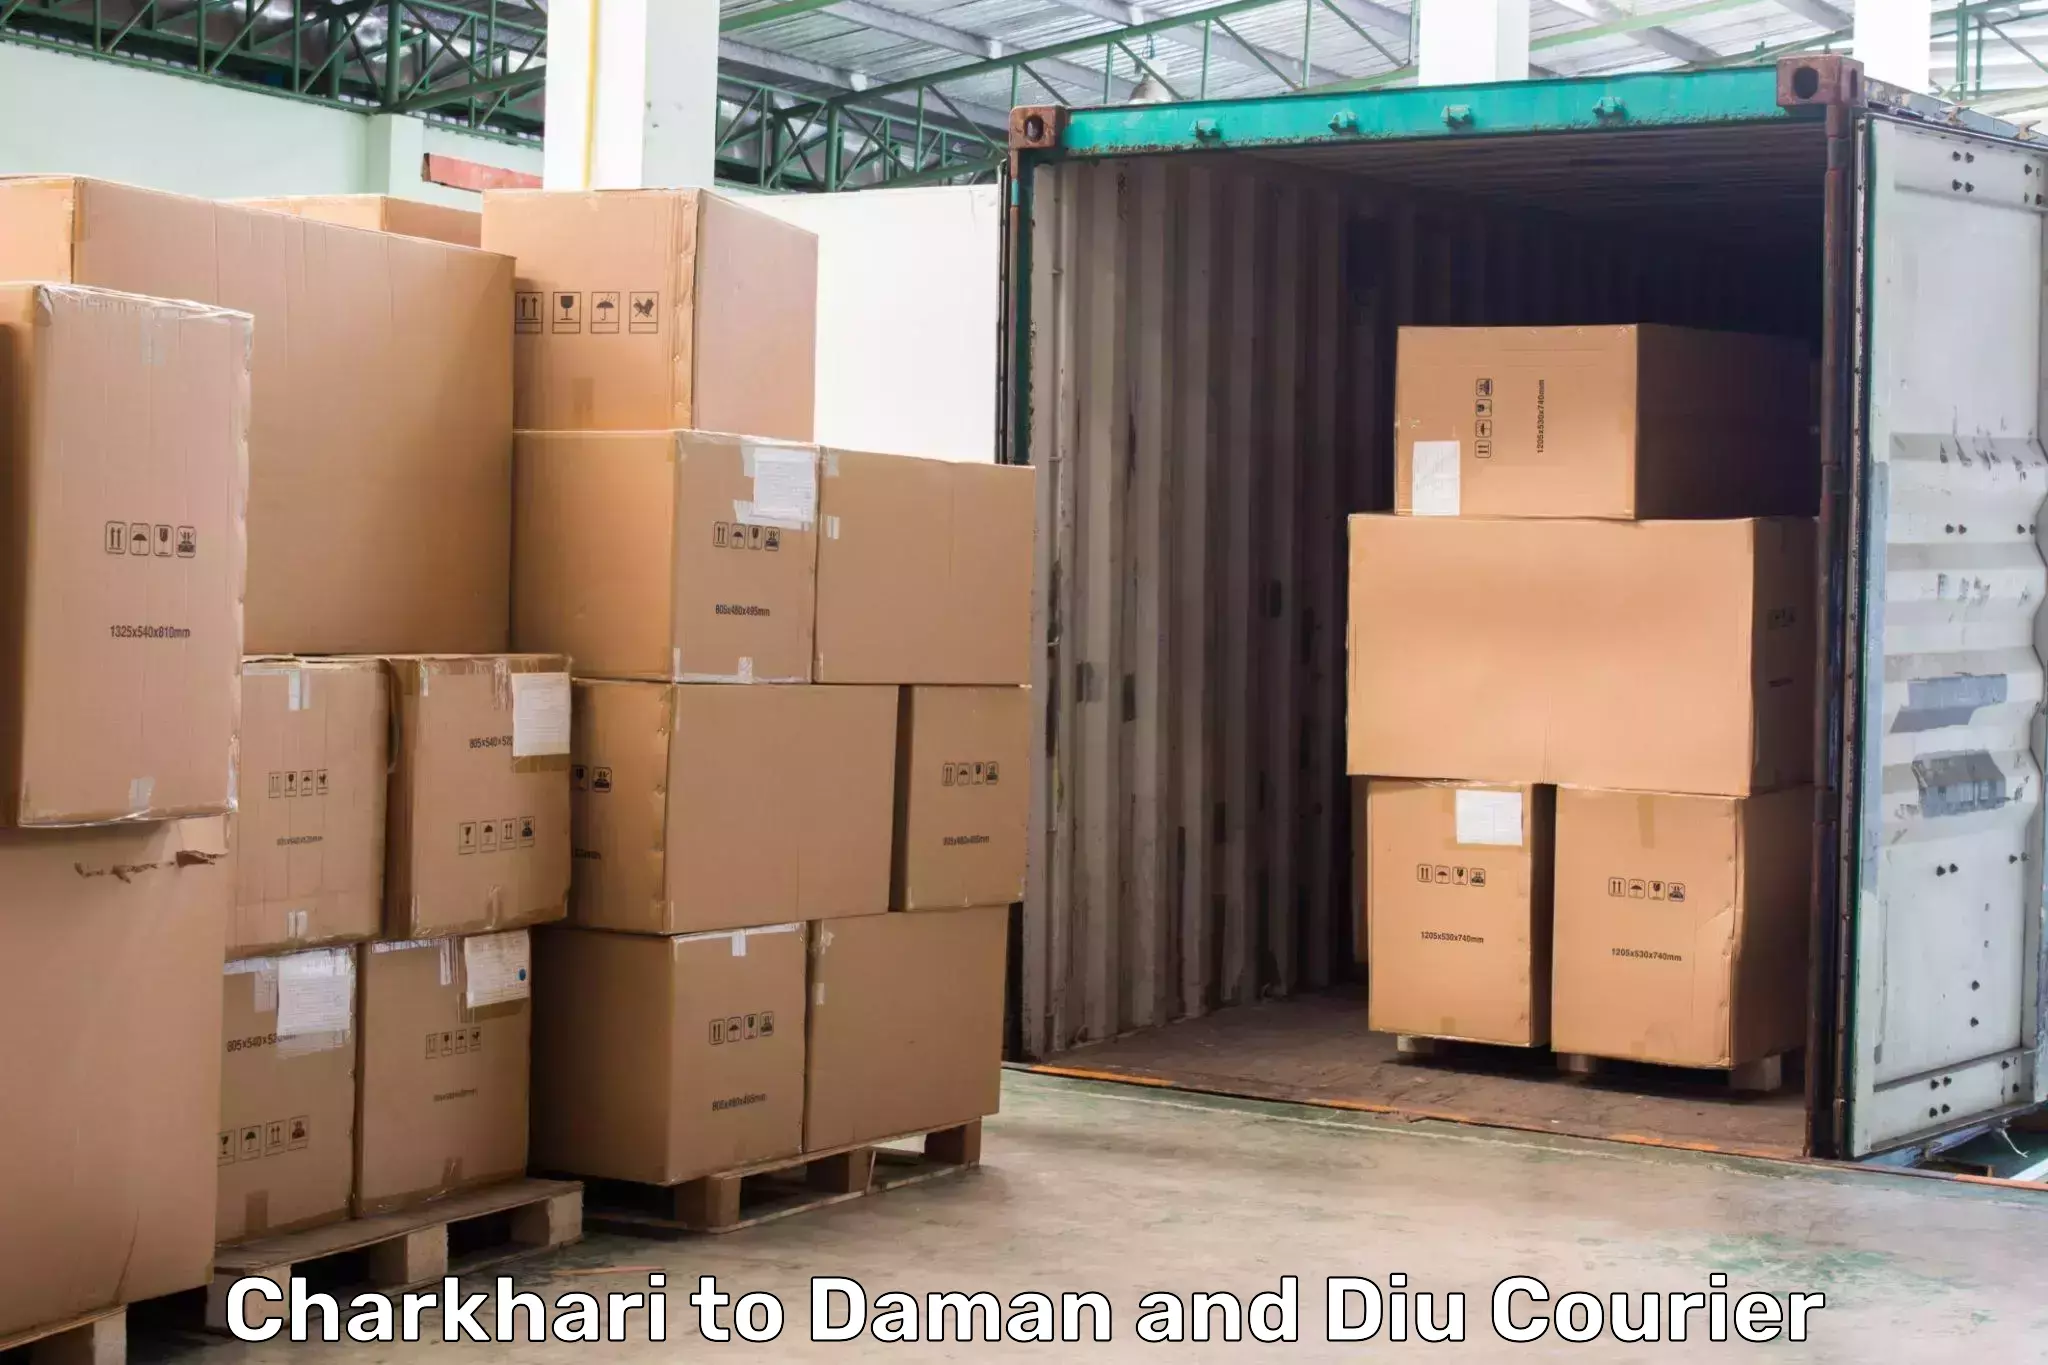 24-hour courier service Charkhari to Daman and Diu